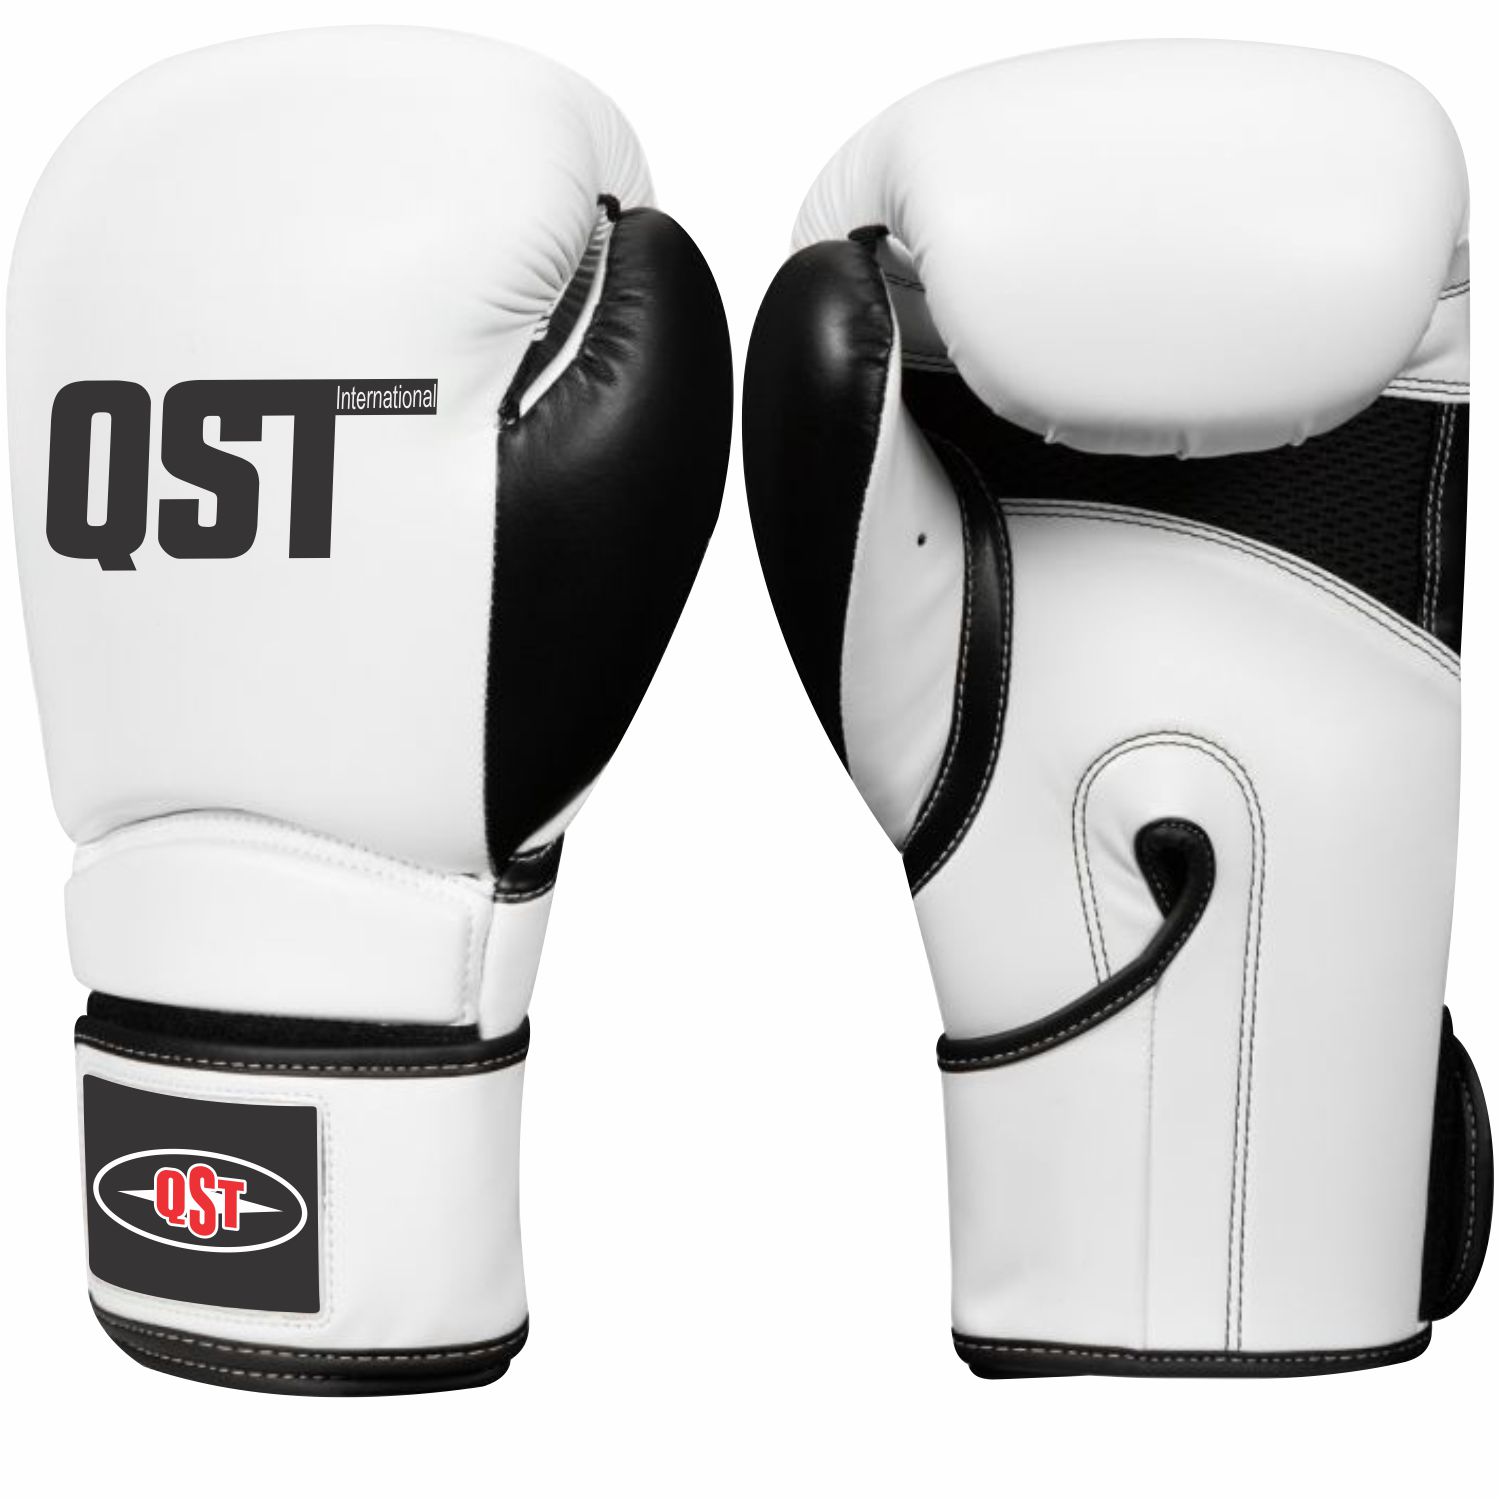 Professional Boxing Gloves - PRG-1522